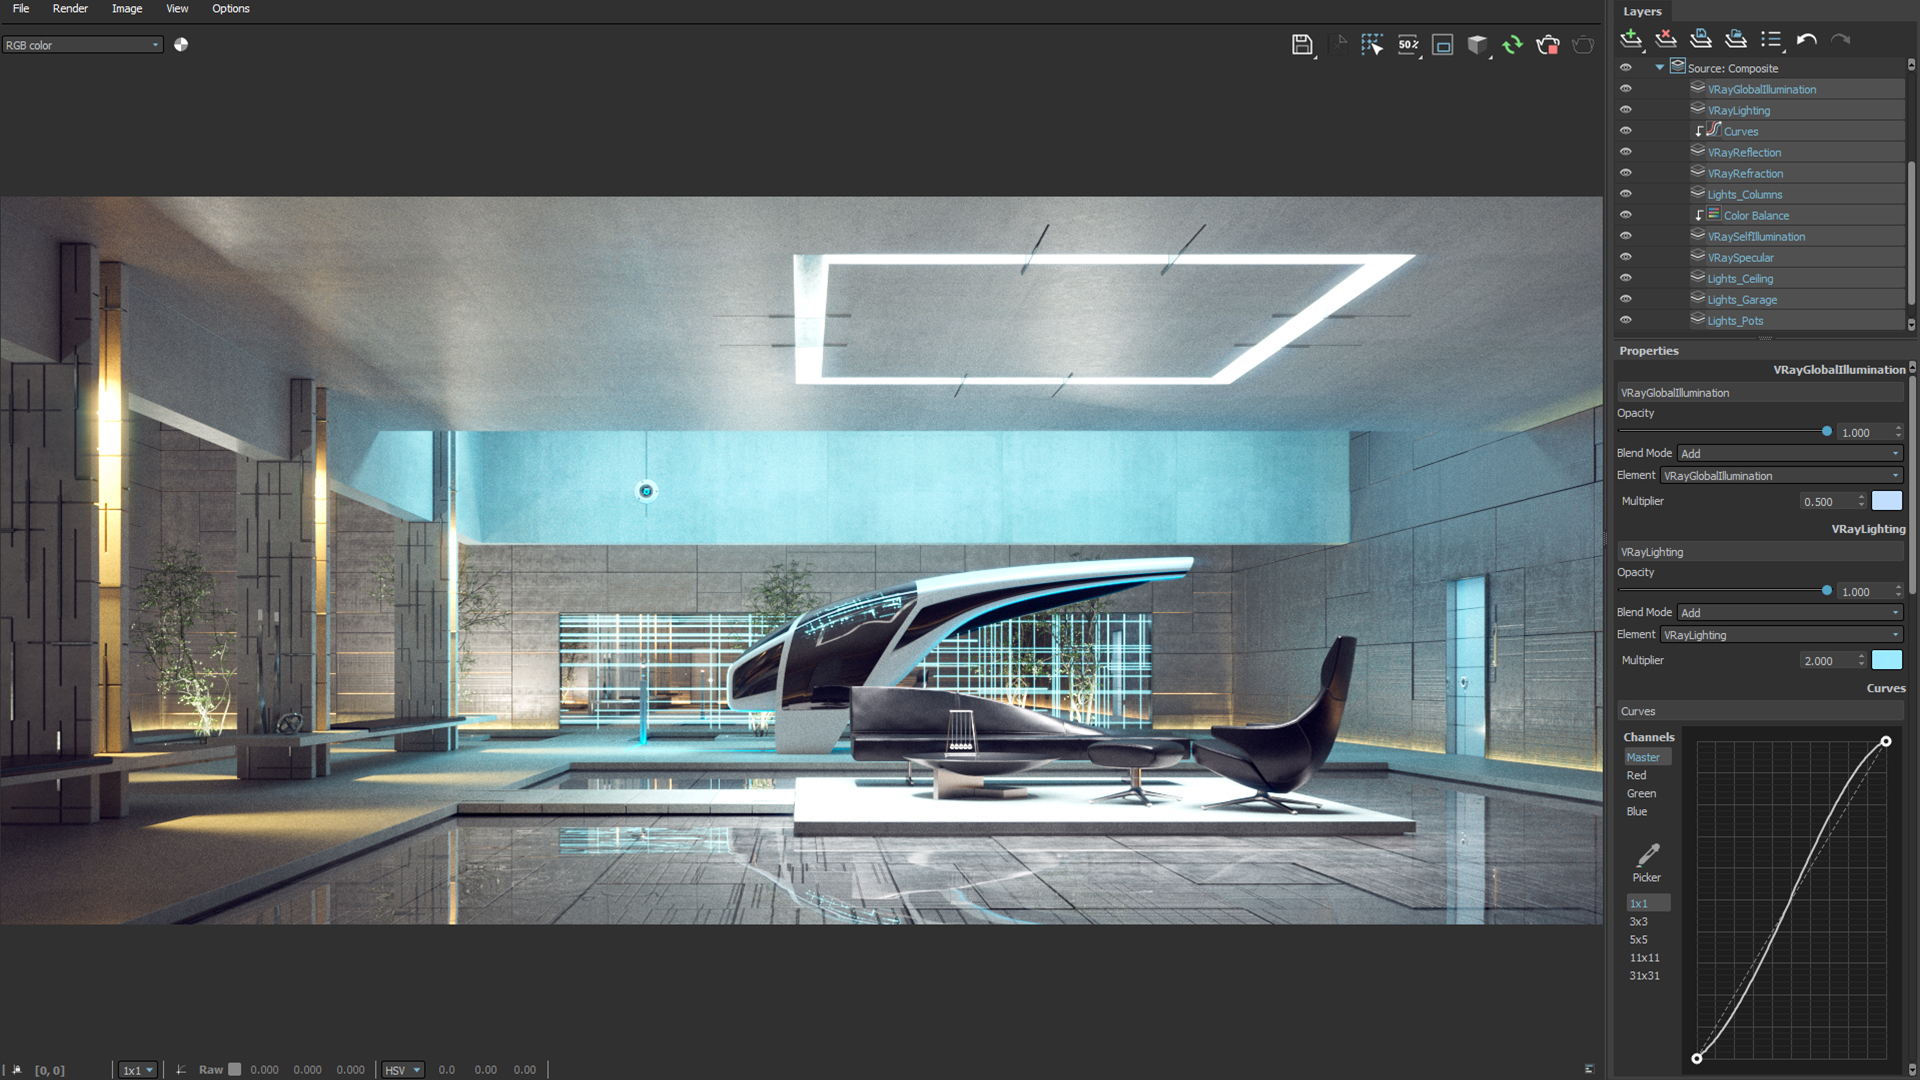 V-ray for 3ds Max 2021